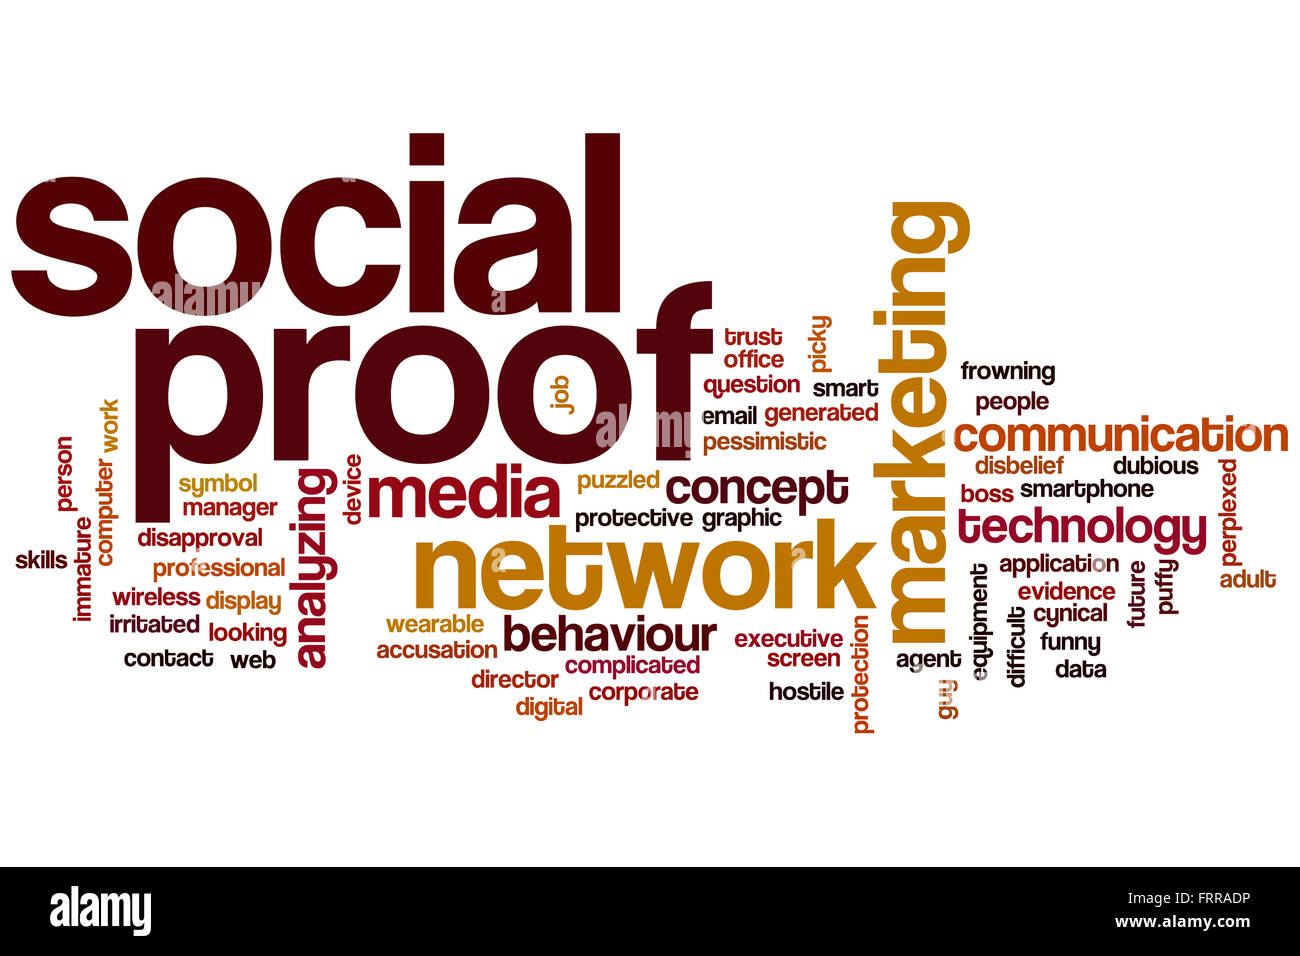 Social proof word cloud concept with network media related tags Stock Photo